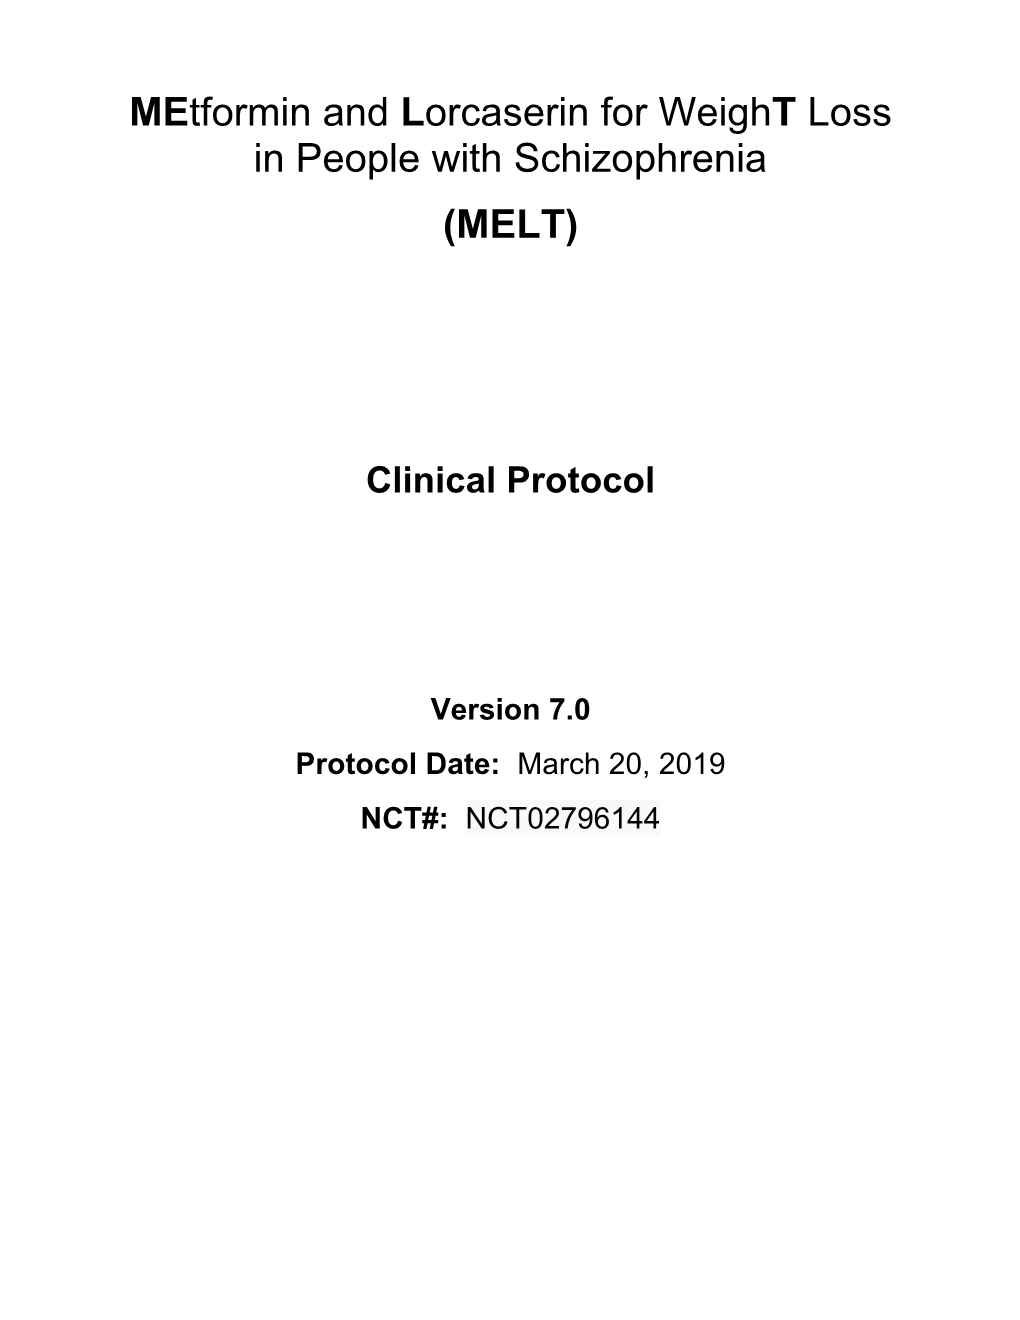 Metformin and Lorcaserin for Weight Loss in People with Schizophrenia (MELT)